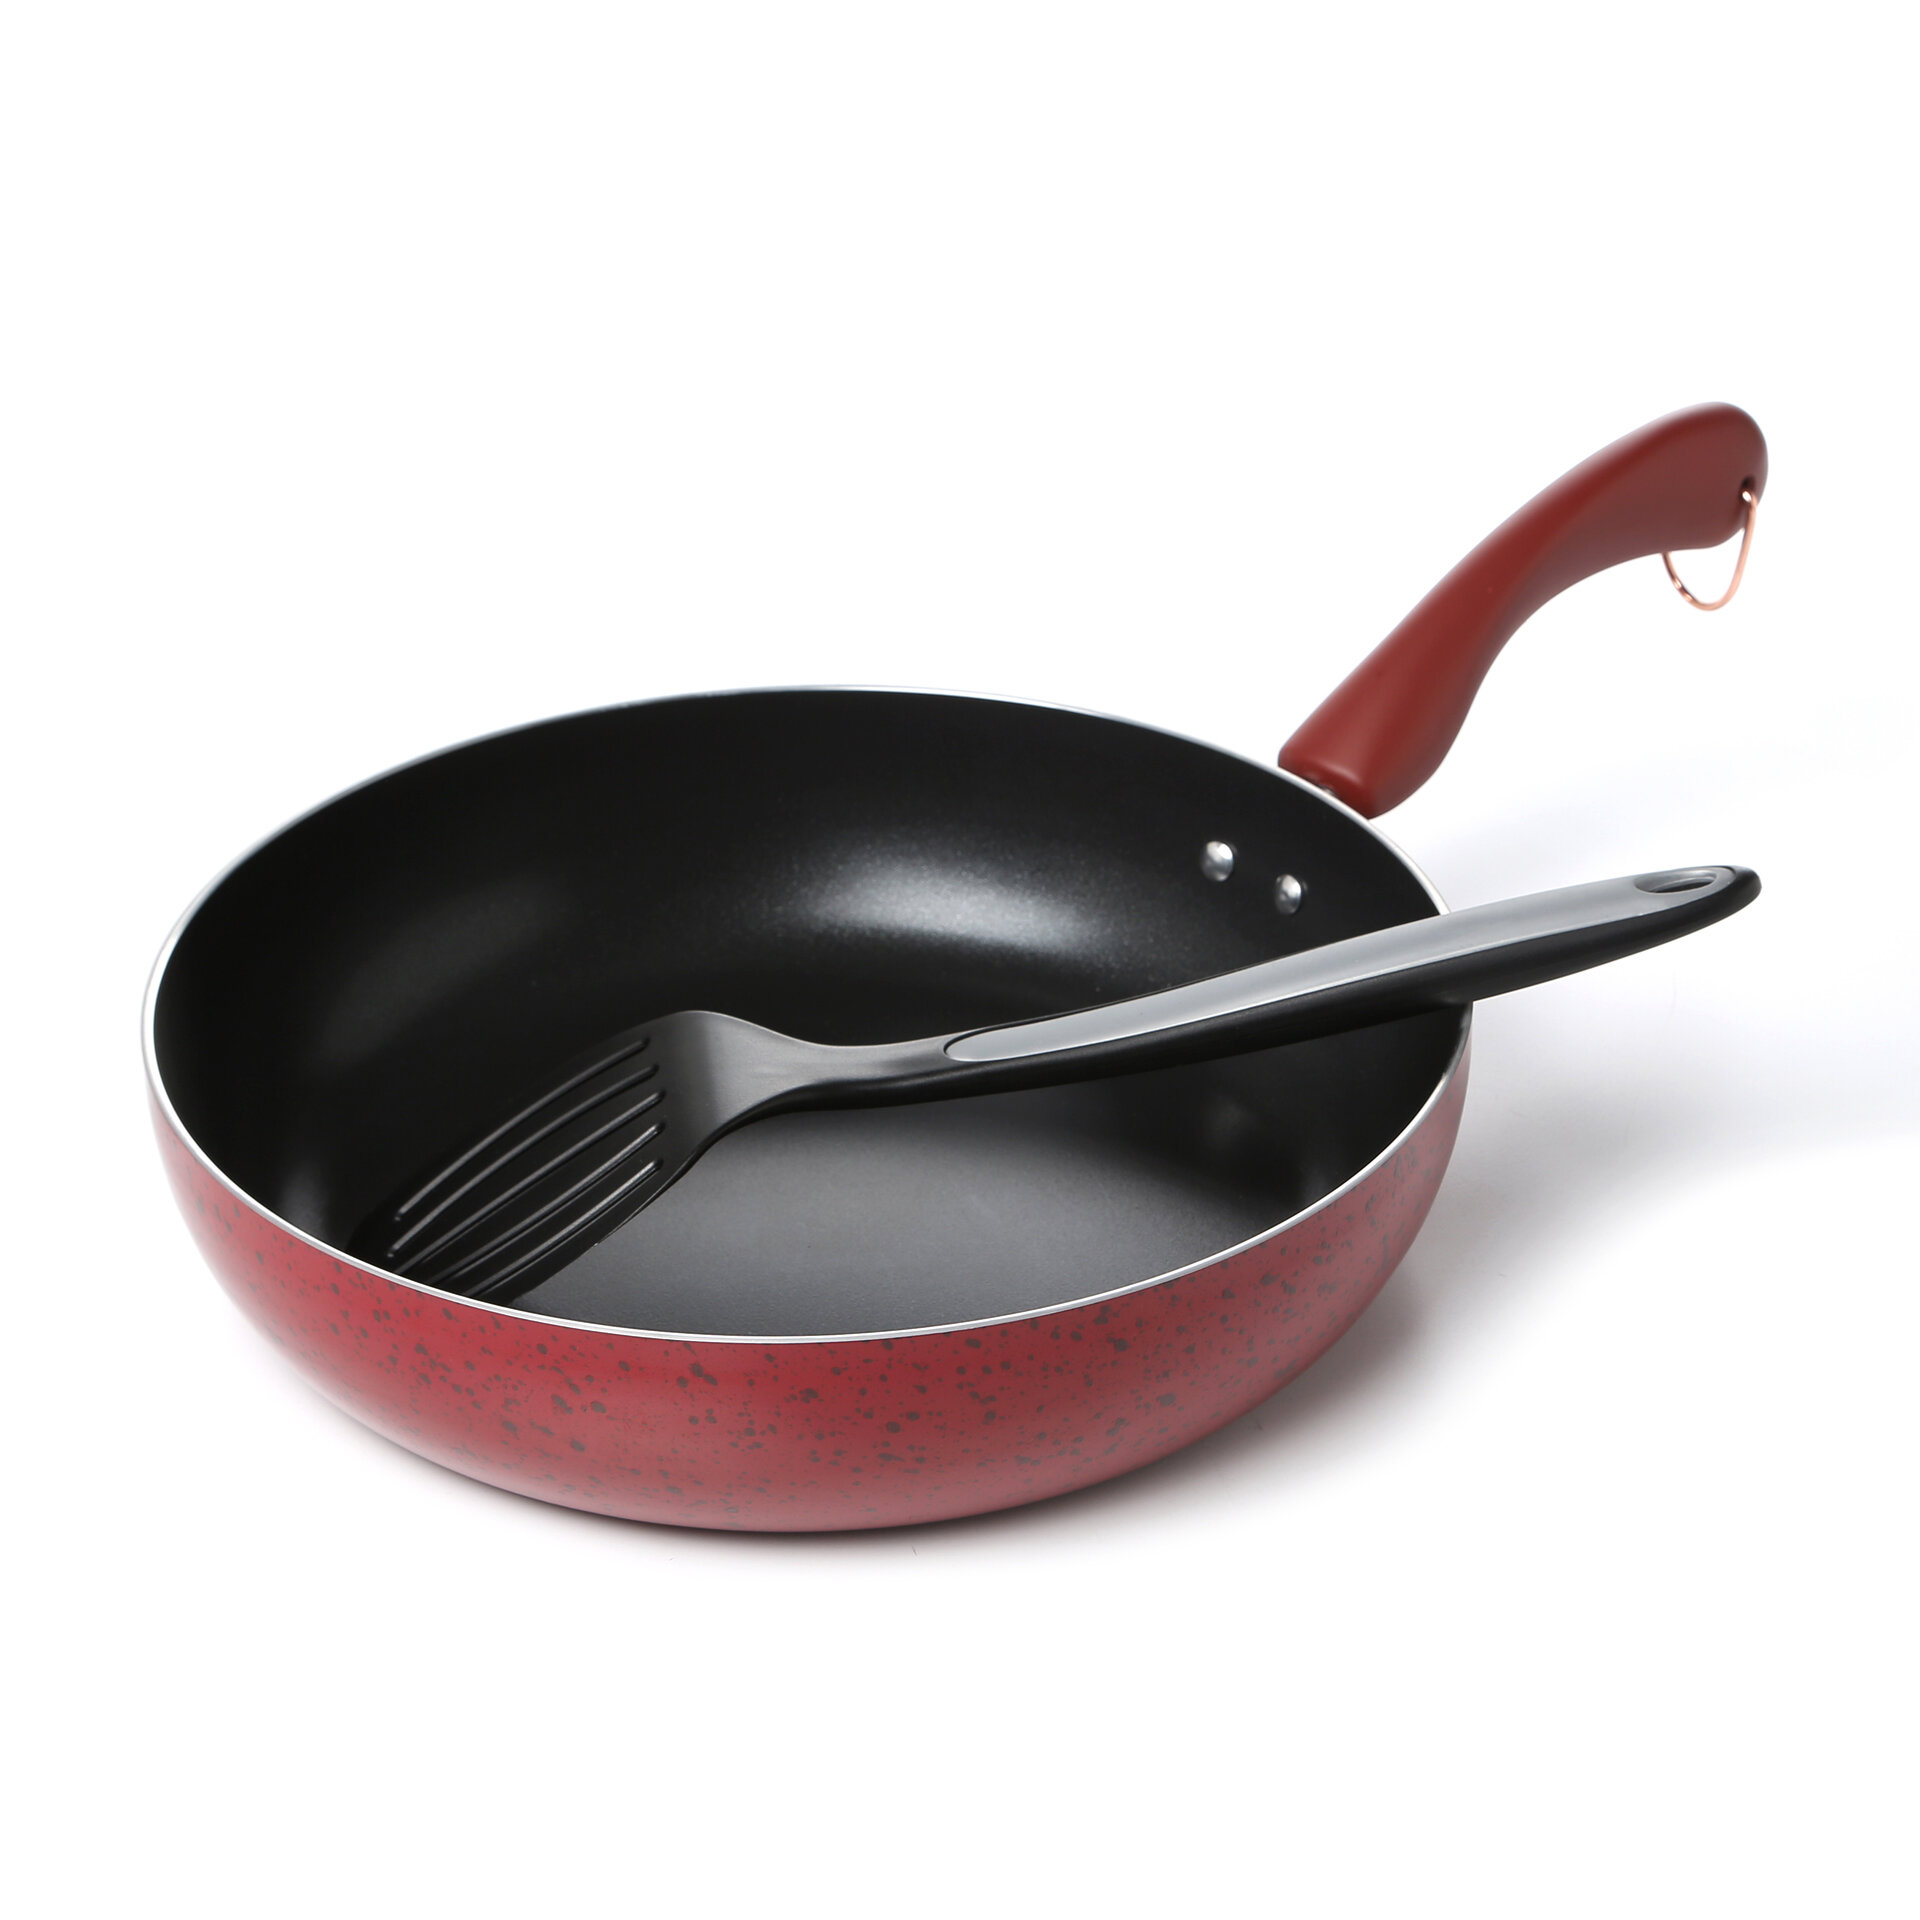 Paula Deen Cast Iron Pans Are Recalled - The New York Times